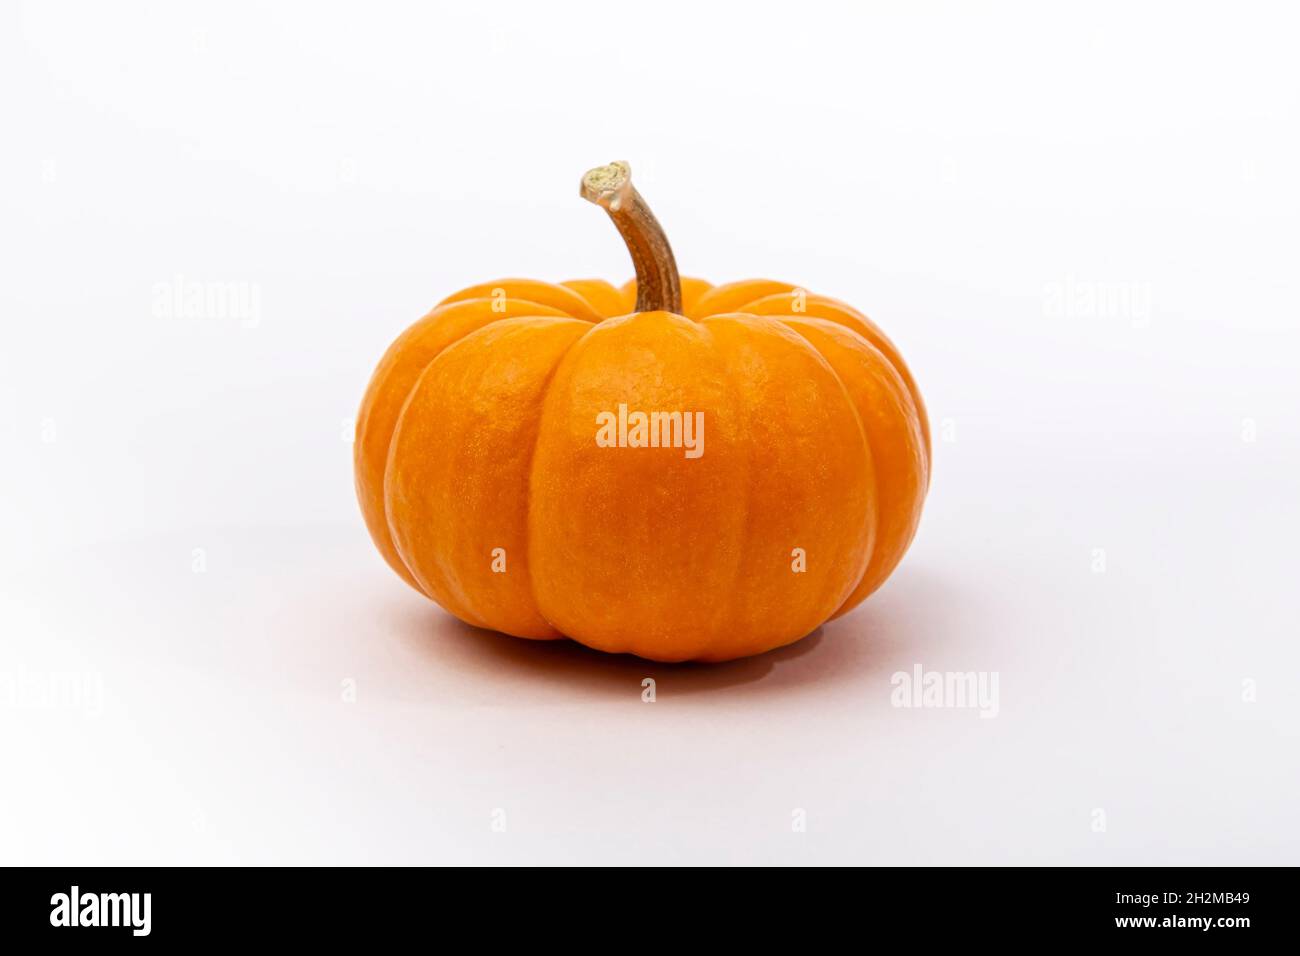 Orange pumpkin isolated on white background. Pumpkins are widely grown for commercial use and as food, aesthetics, and recreational purposes. Much con Stock Photo